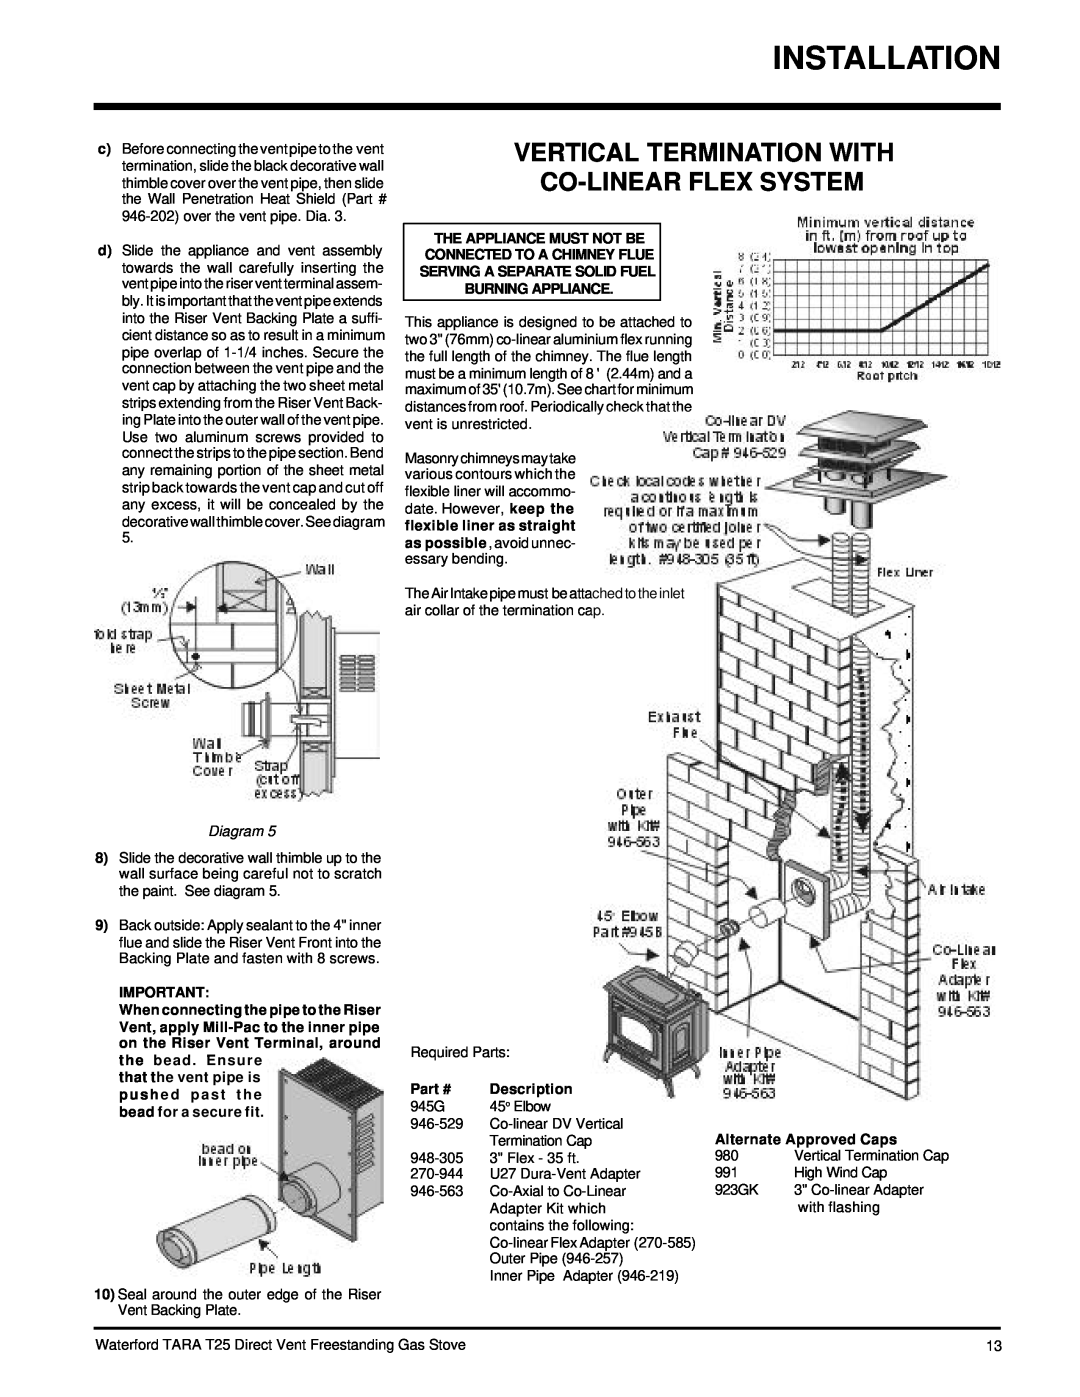 Waterford Appliances T25-LP Vertical Termination With Co-Linearflex System, The Appliance Must Not Be, Part #, Description 